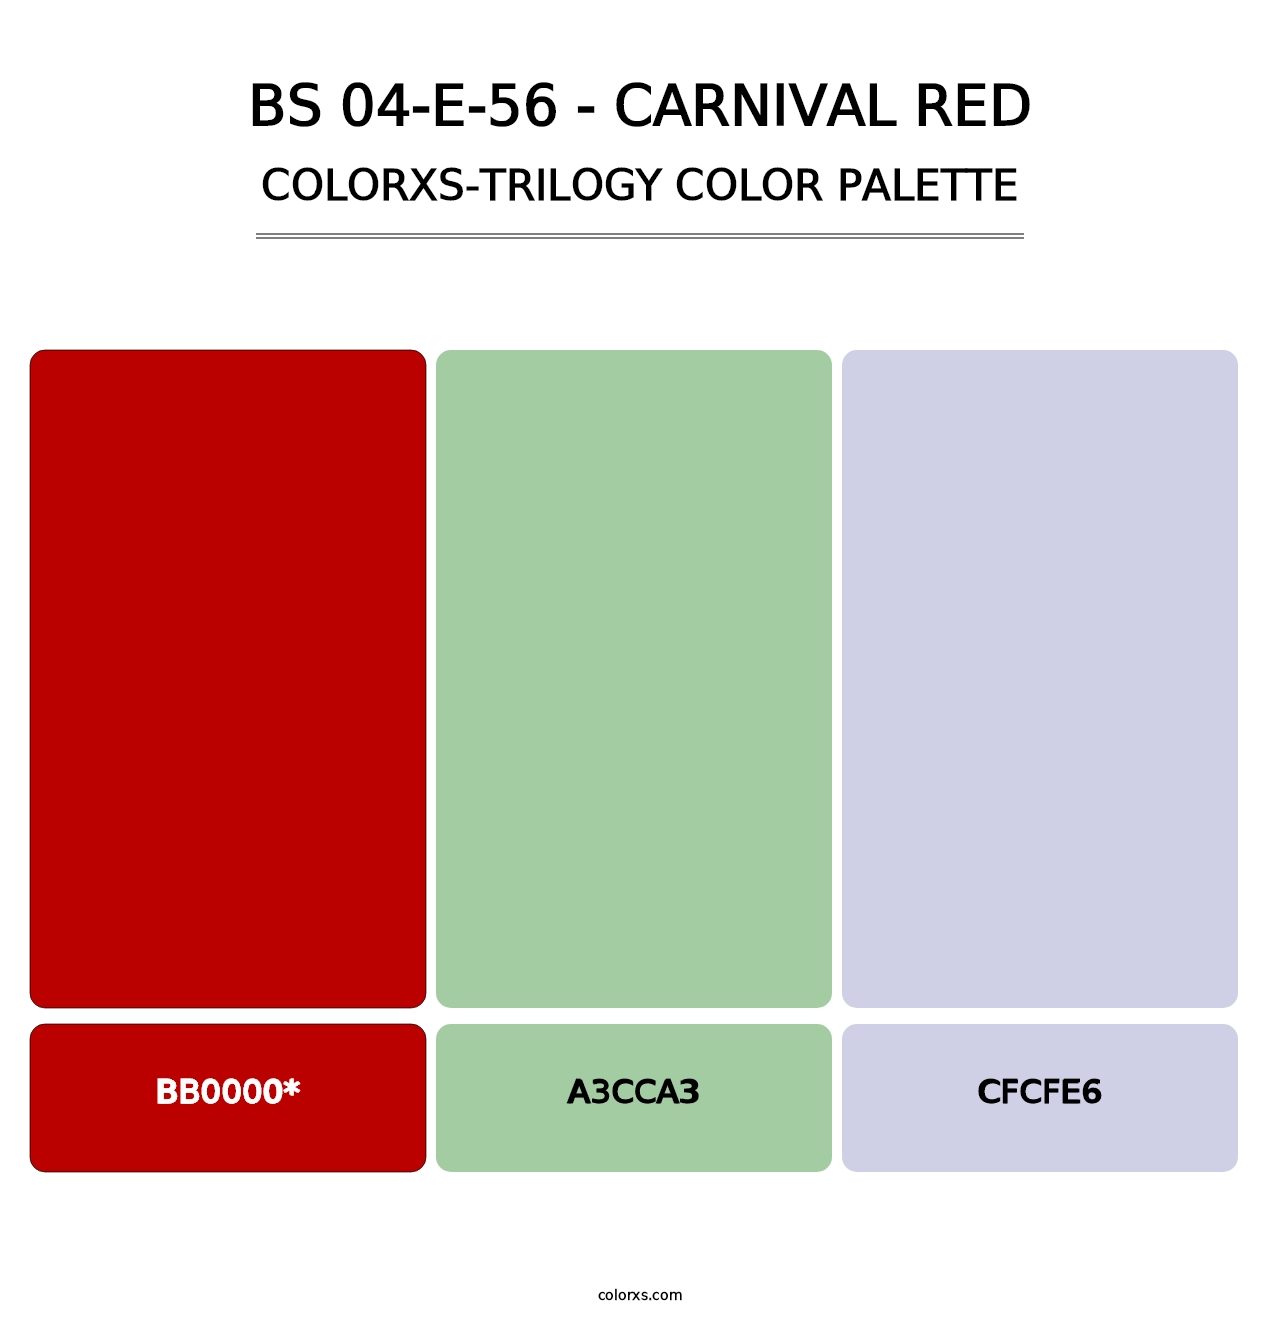 BS 04-E-56 - Carnival Red - Colorxs Trilogy Palette